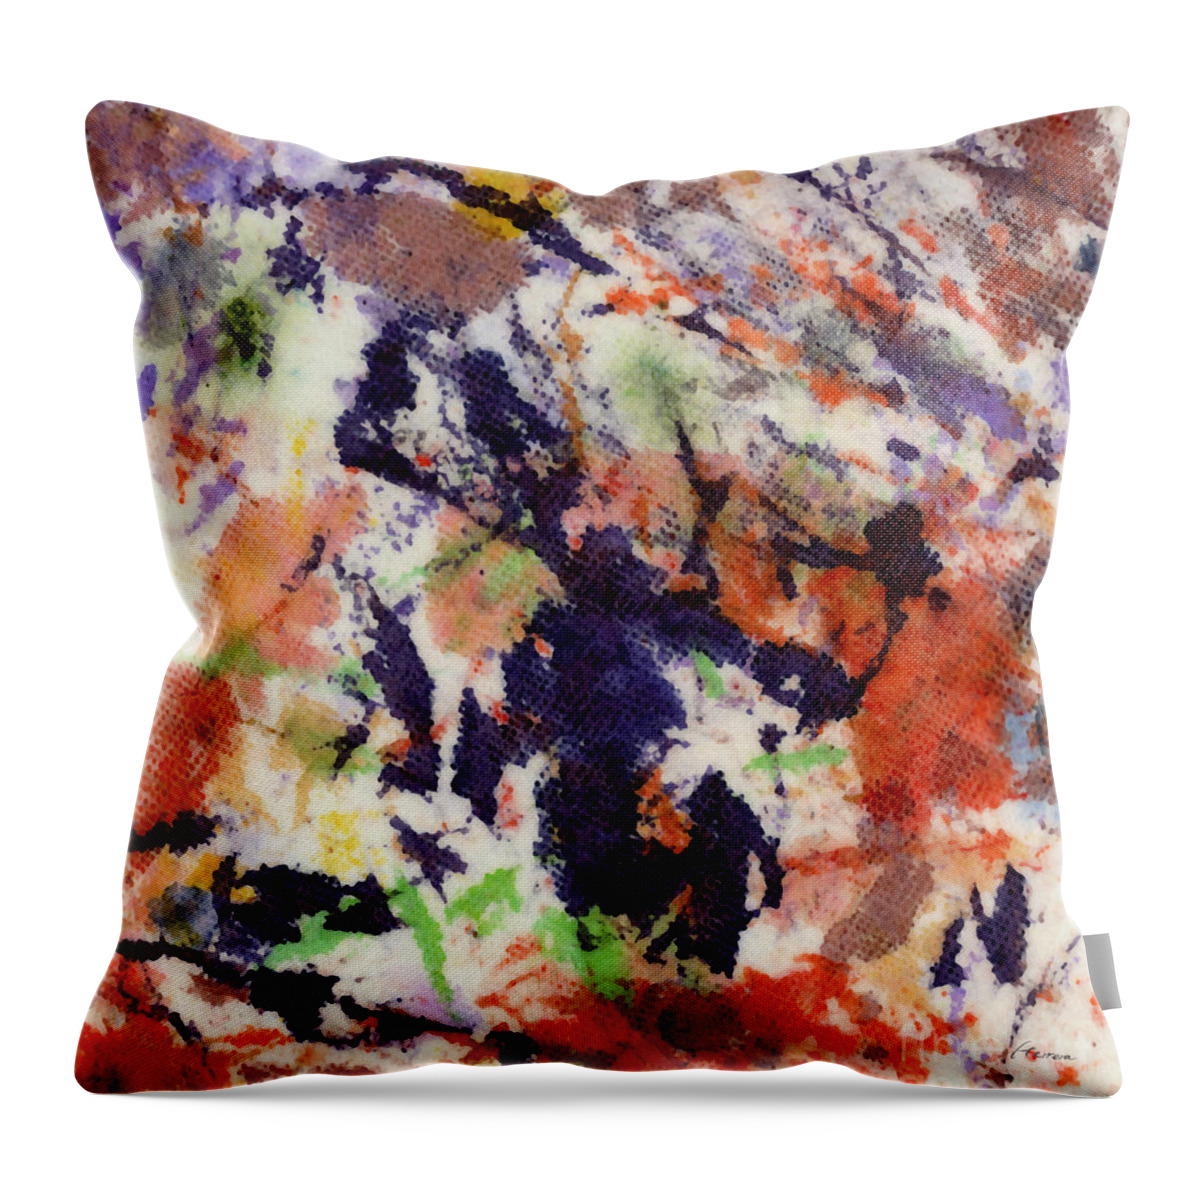 Organic Throw Pillow featuring the painting Hh0803181432 by Hailey E Herrera